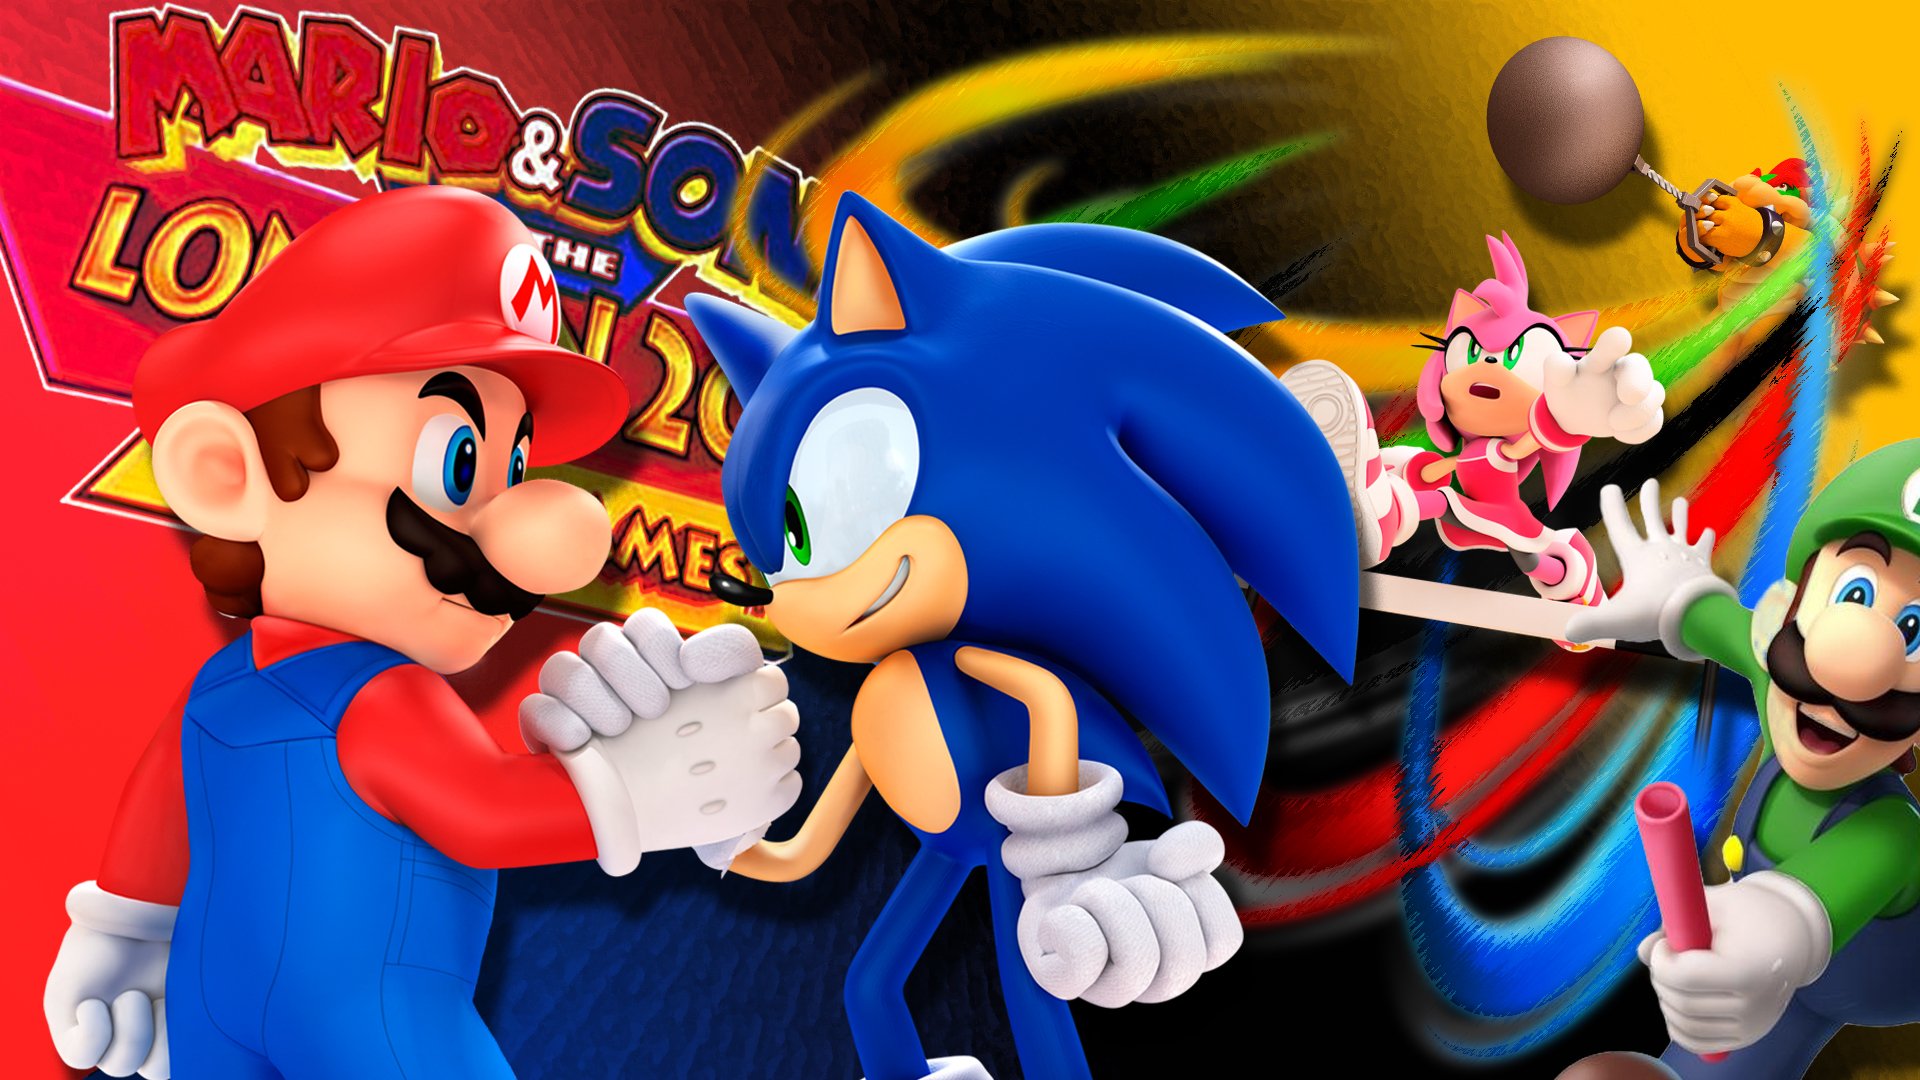 Sonic And Mario - HD Wallpaper 